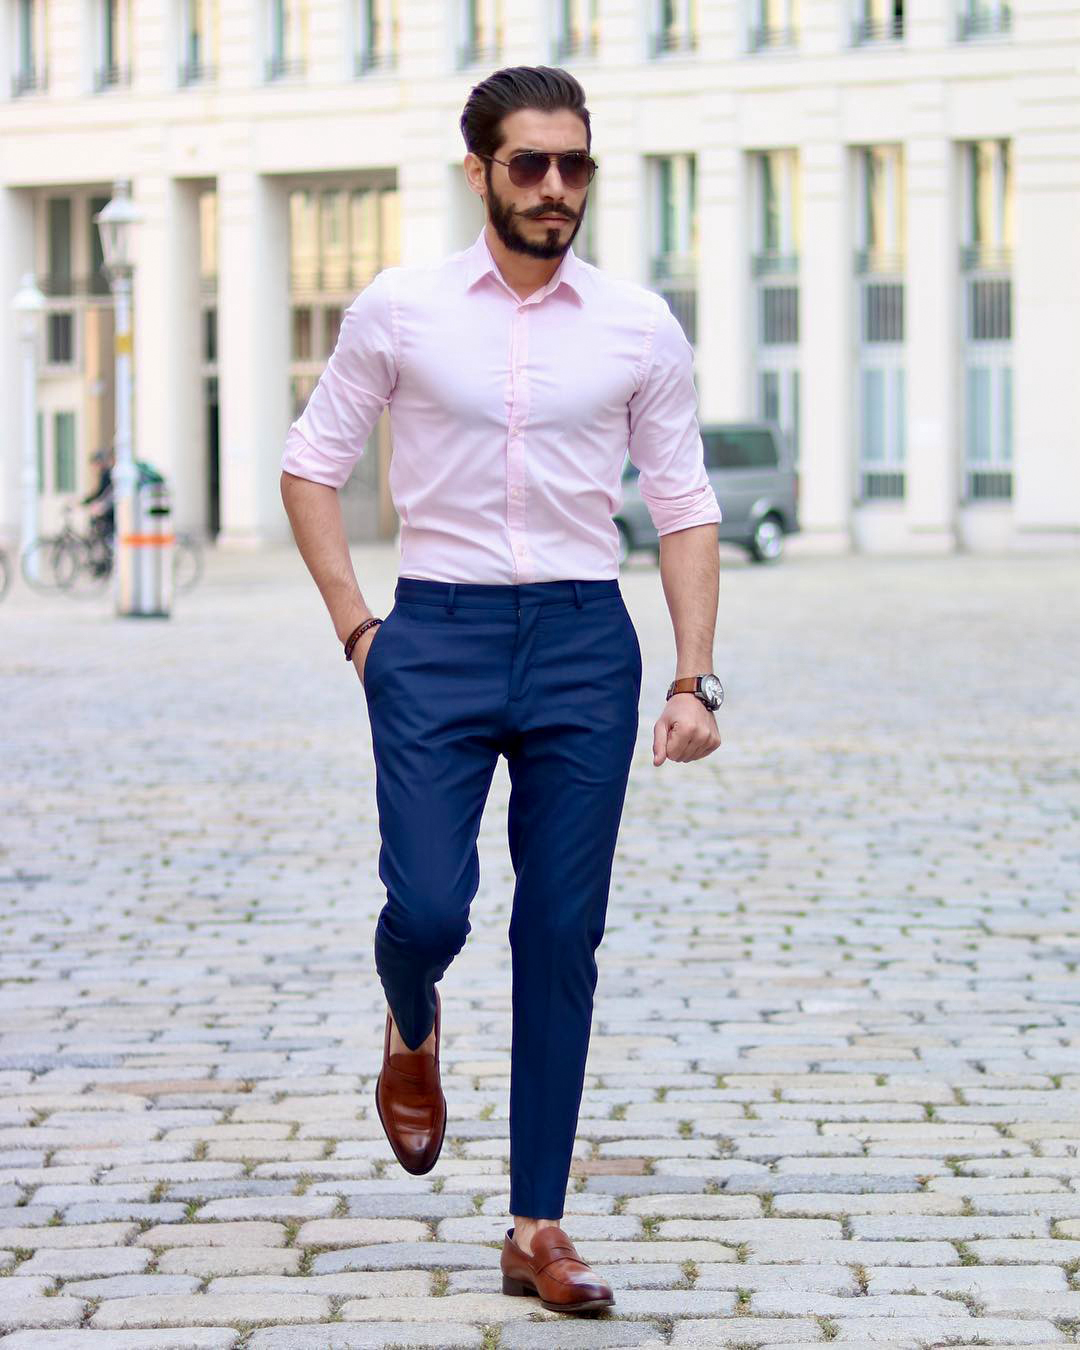 light pink shirt, blue pants, and brown shoes